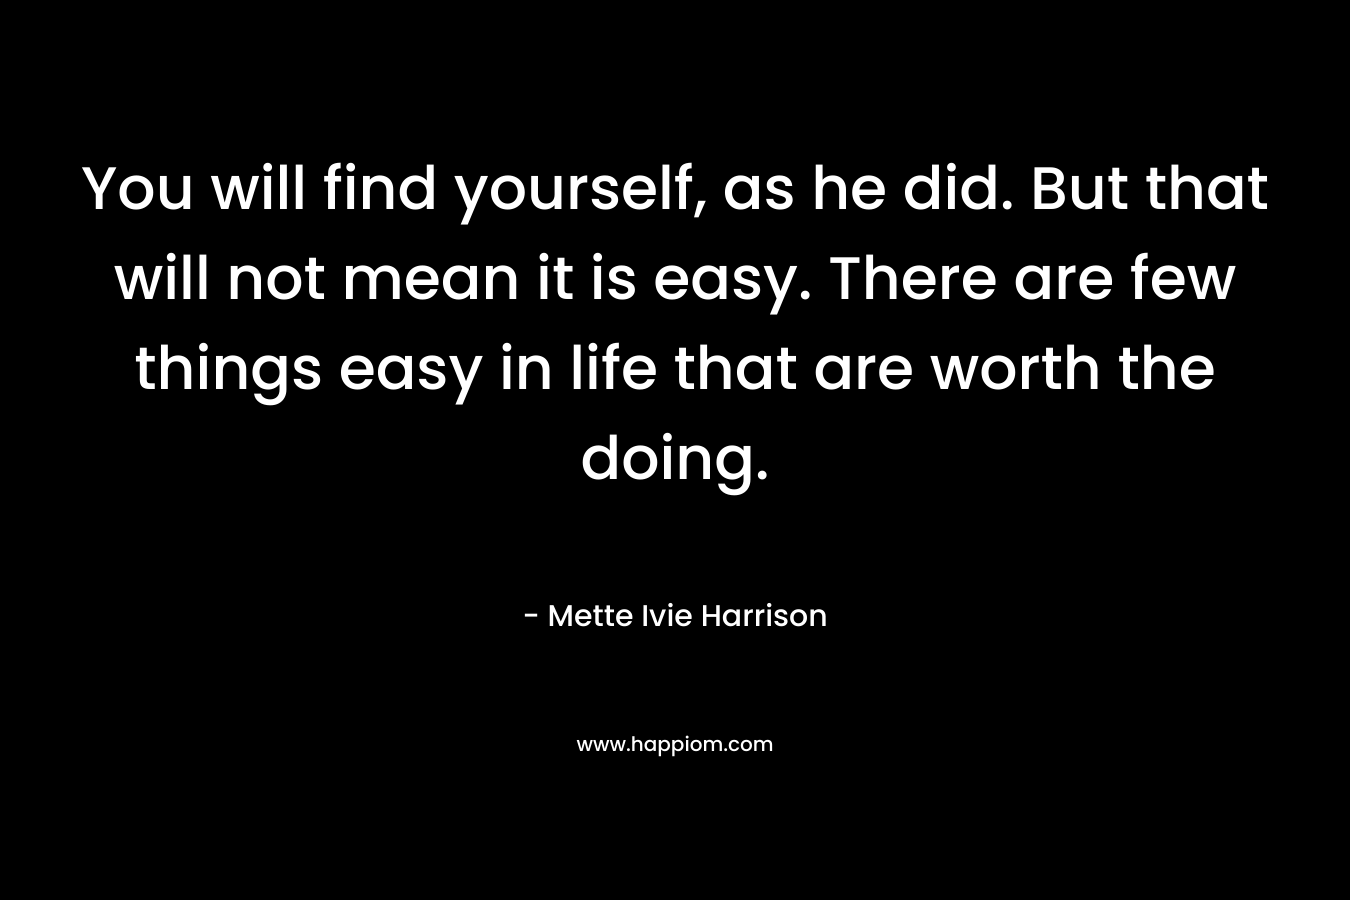 You will find yourself, as he did. But that will not mean it is easy. There are few things easy in life that are worth the doing. – Mette Ivie Harrison